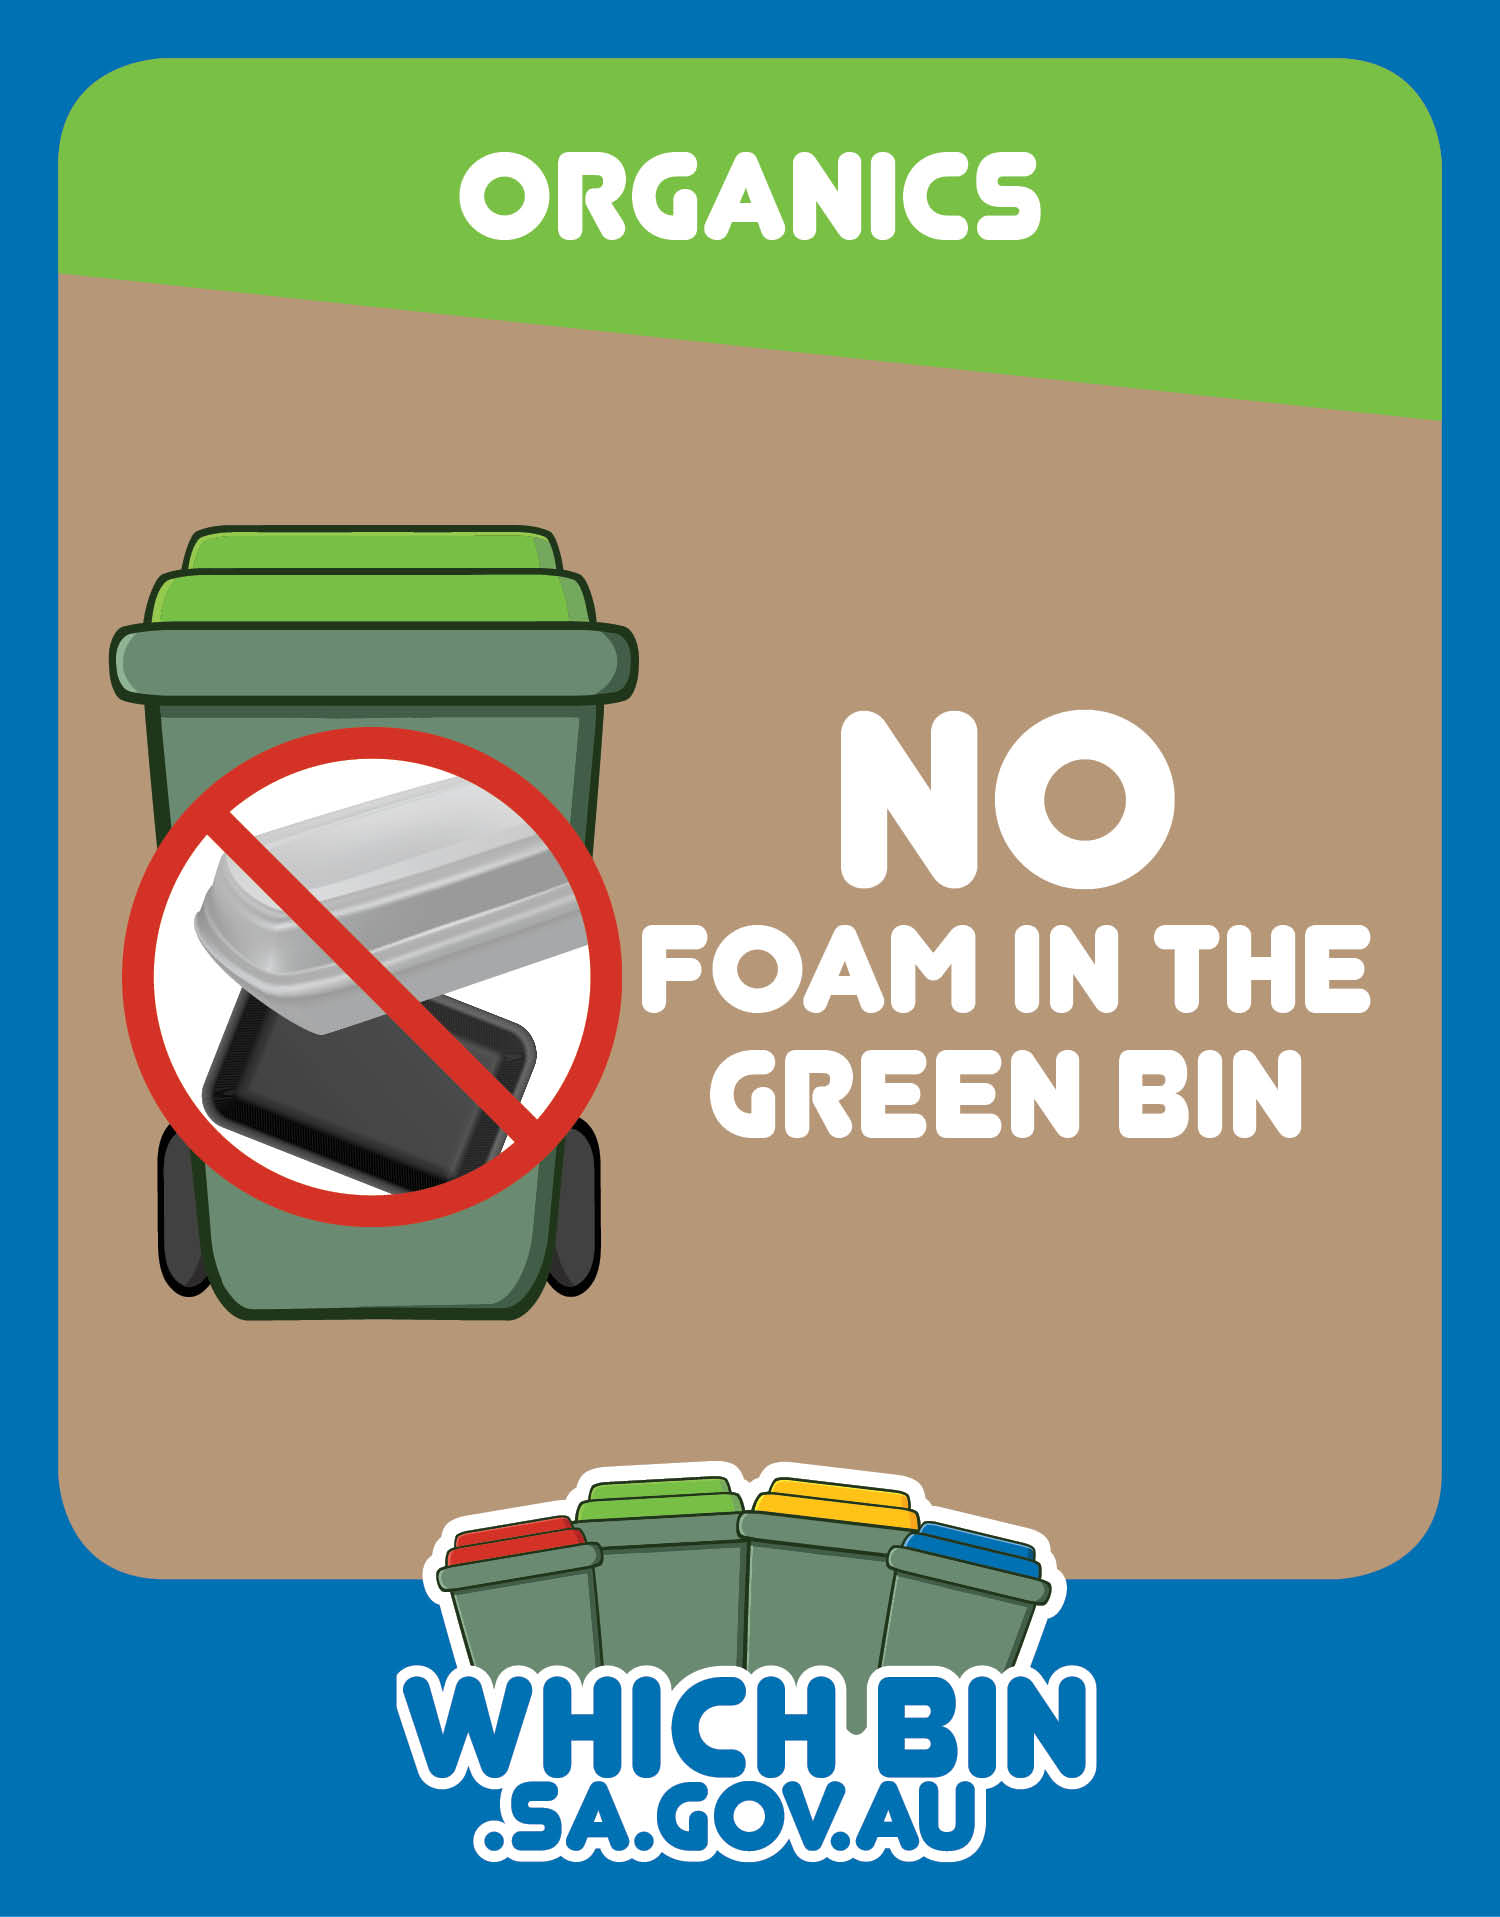 Please keep polystyrene foam and other plastics out of the green bin